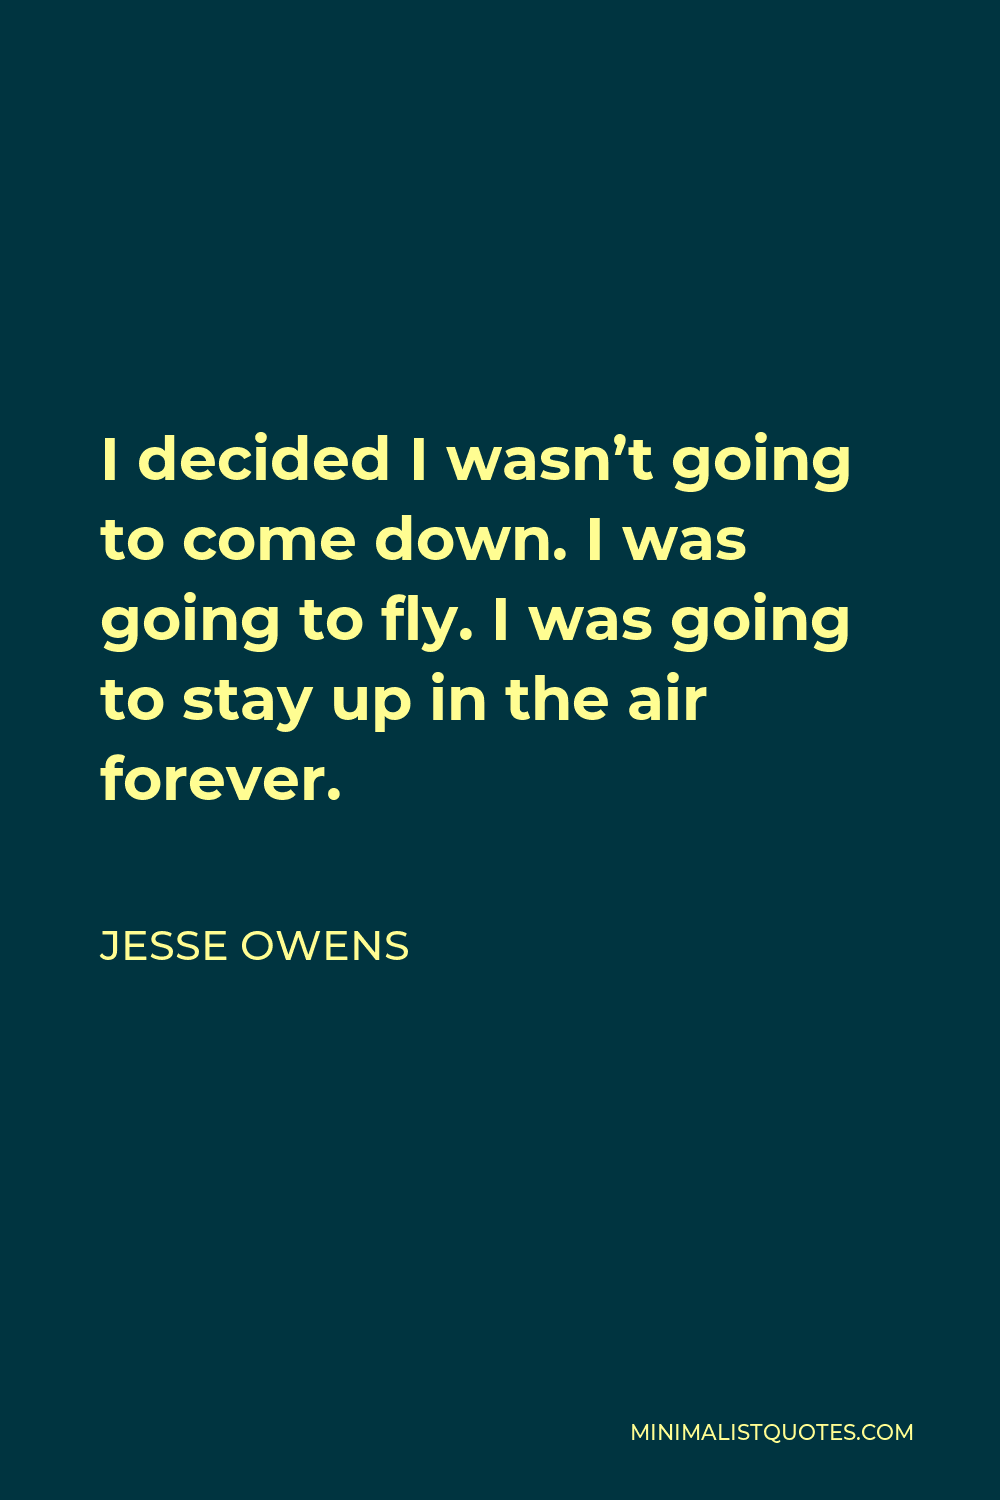 Jesse Owens Quote - I decided I wasn’t going to come down. I was going to fly. I was going to stay up in the air forever.